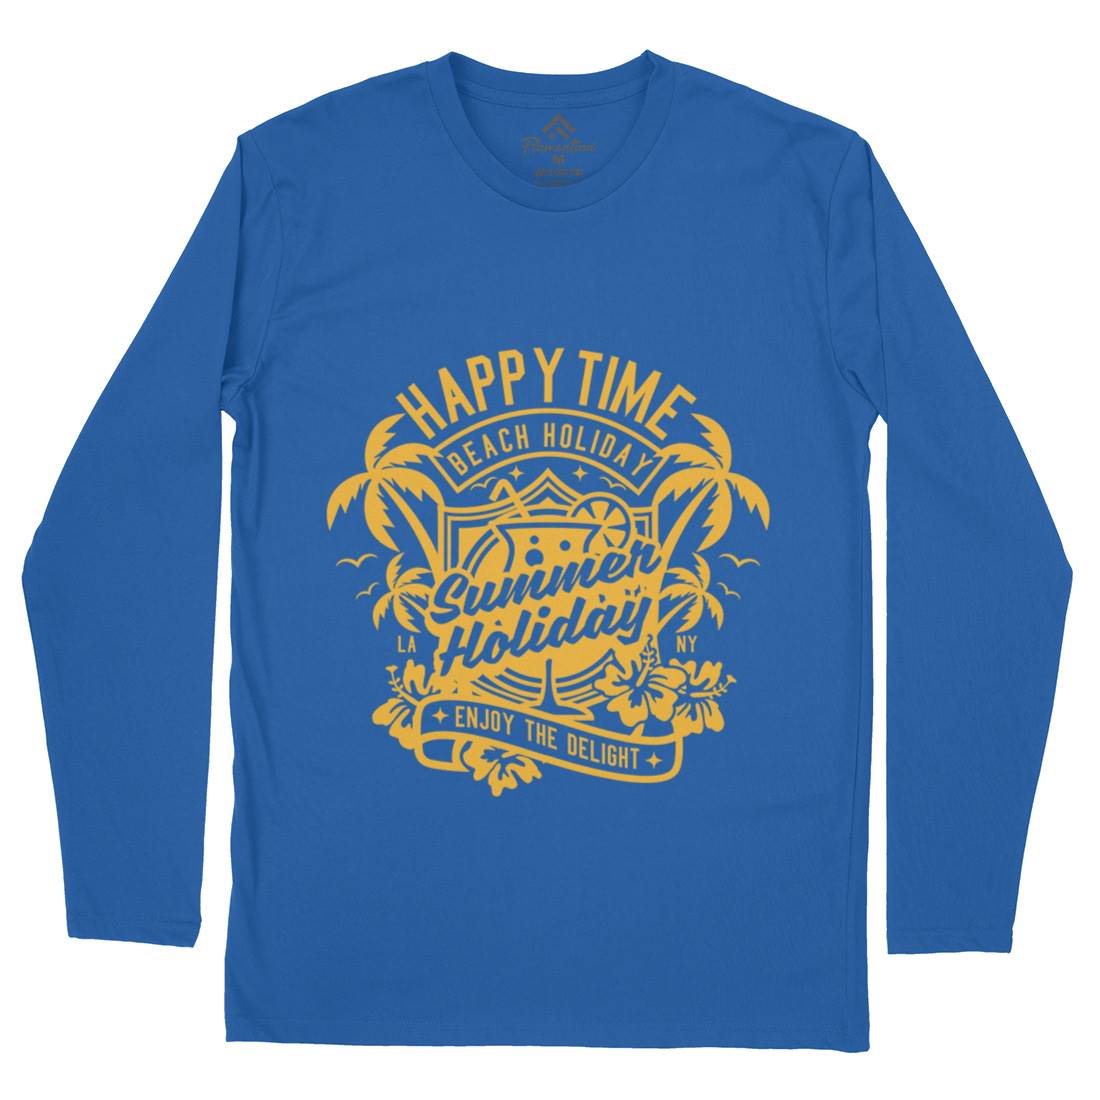 Happy Time Mens Long Sleeve T-Shirt Surf A238